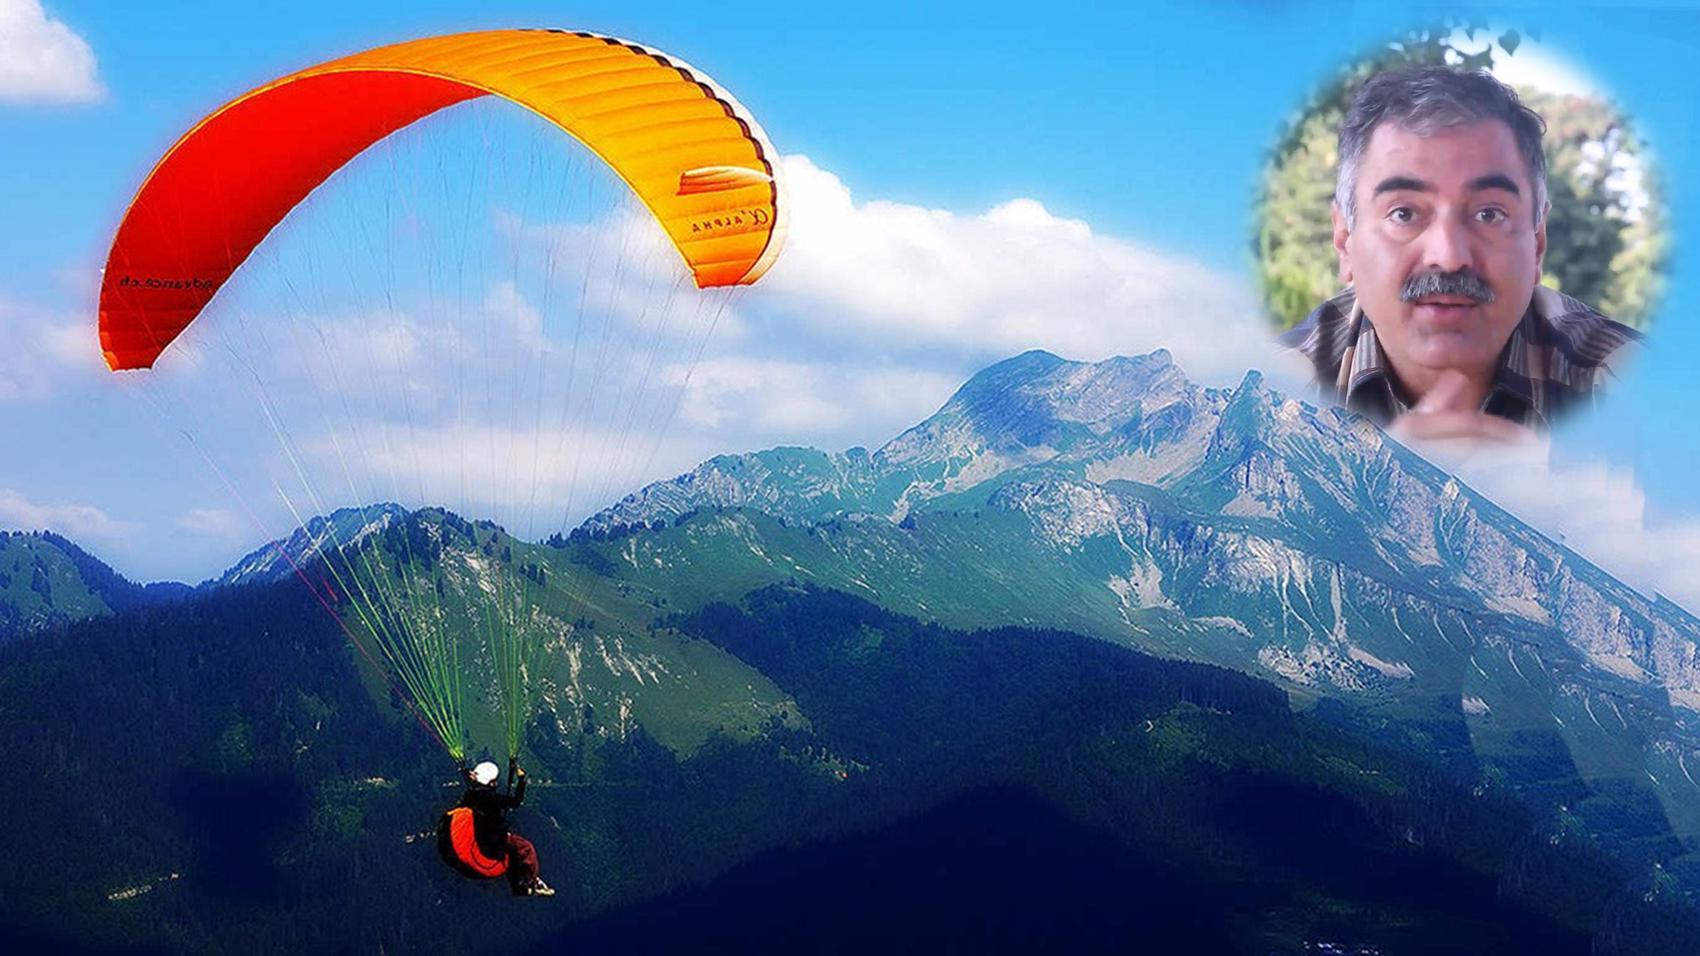 Career in Paragliding